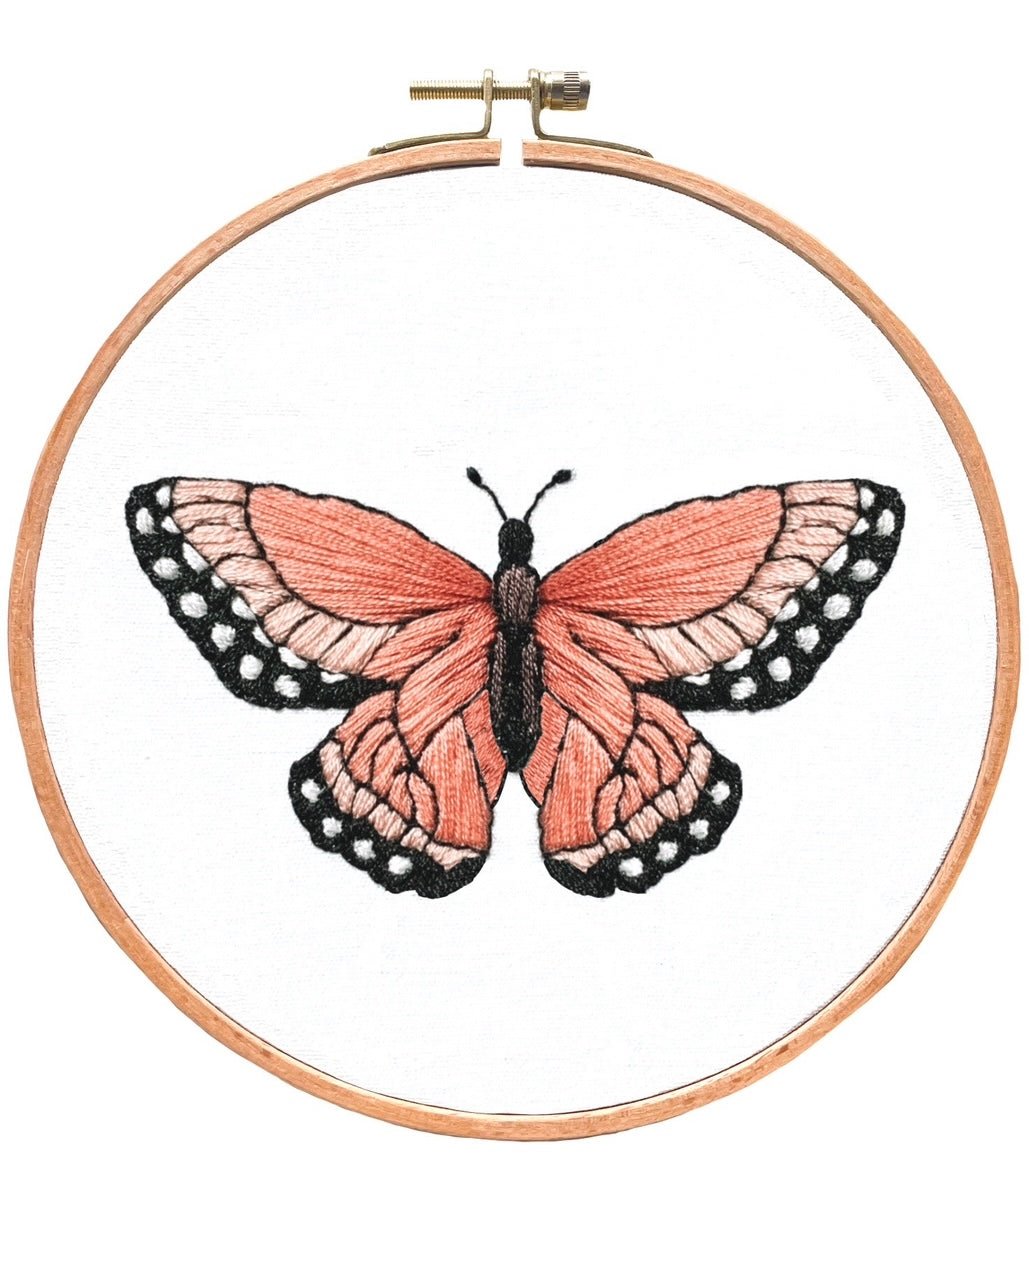 Pink Butterfly Embroidery Kit - Stitched Up Kits